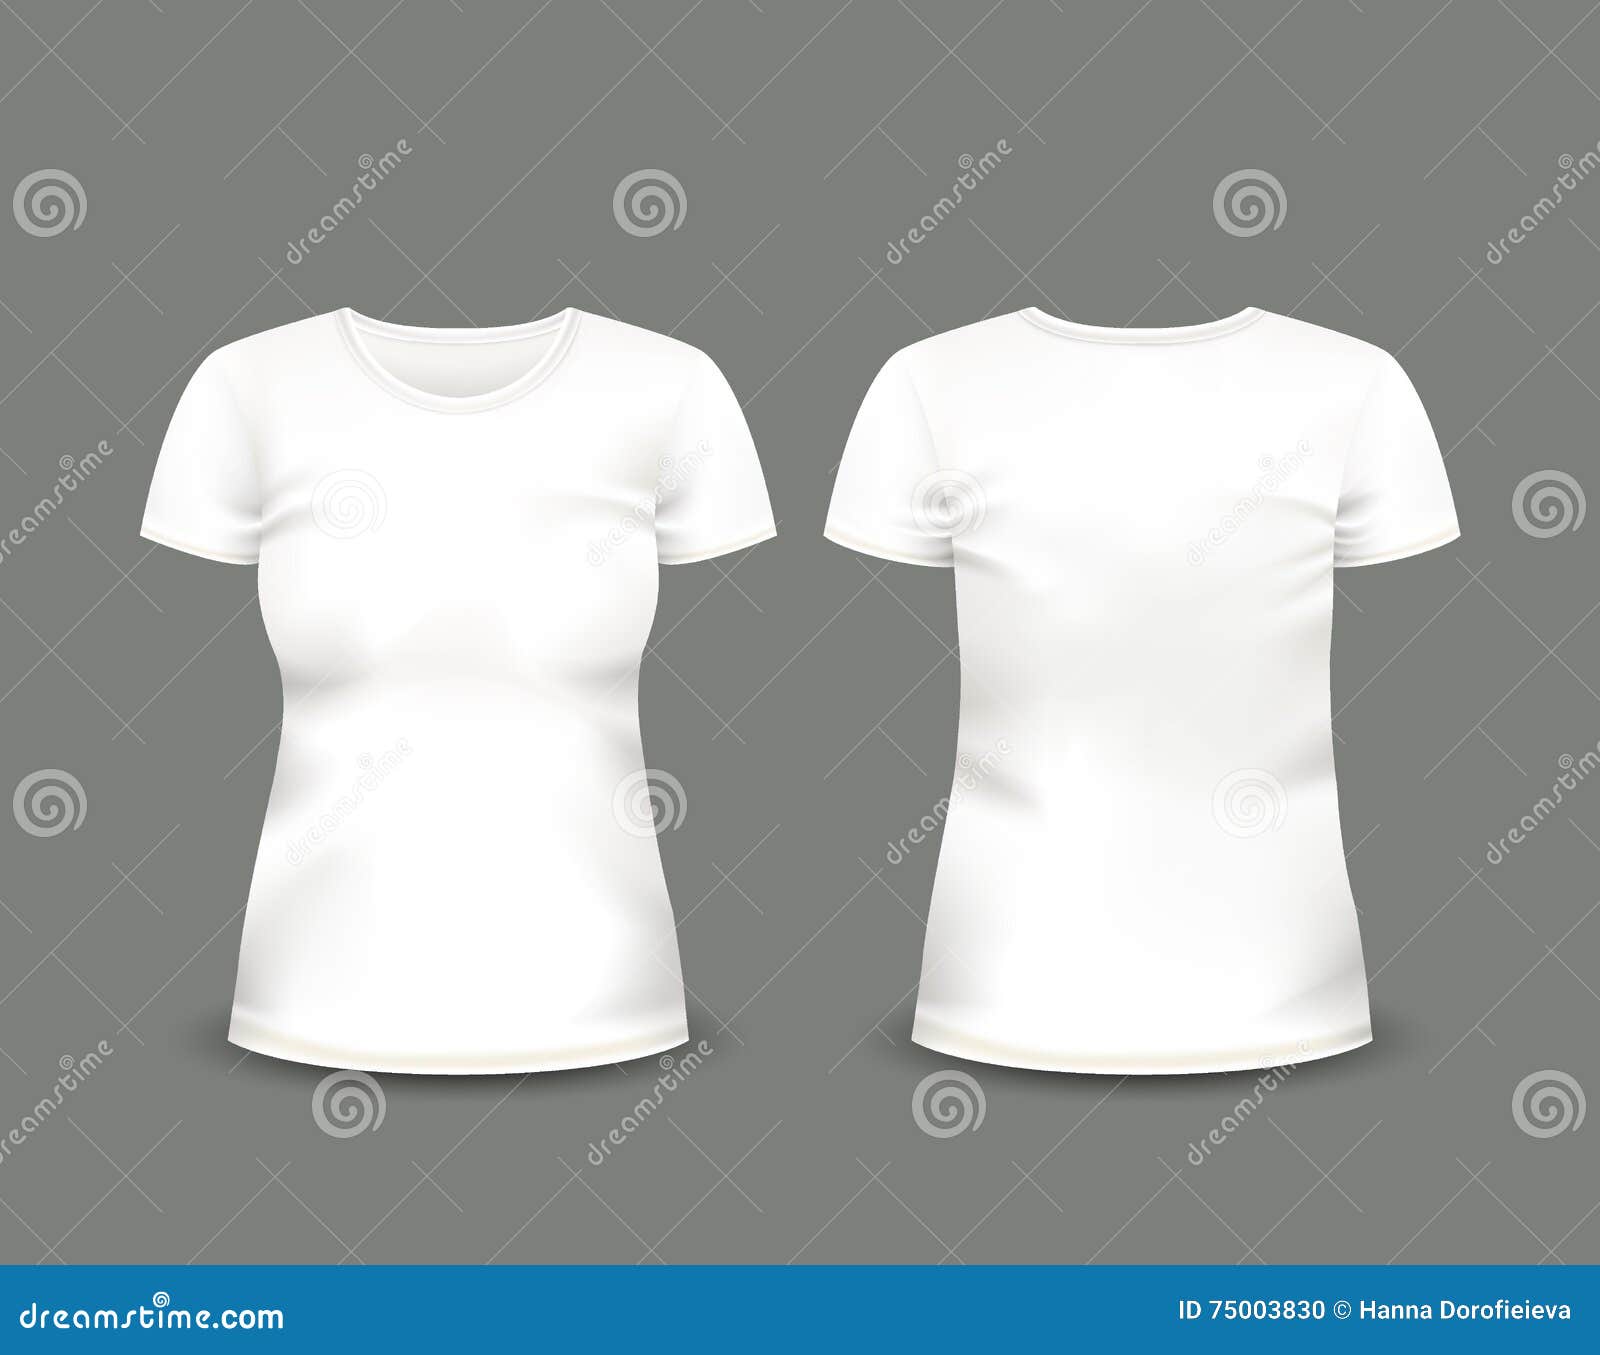 Women S White T-shirt Short Sleeve in Front and Back Views. Vector Template  Stock Vector - Illustration of shop, shirt: 75003830